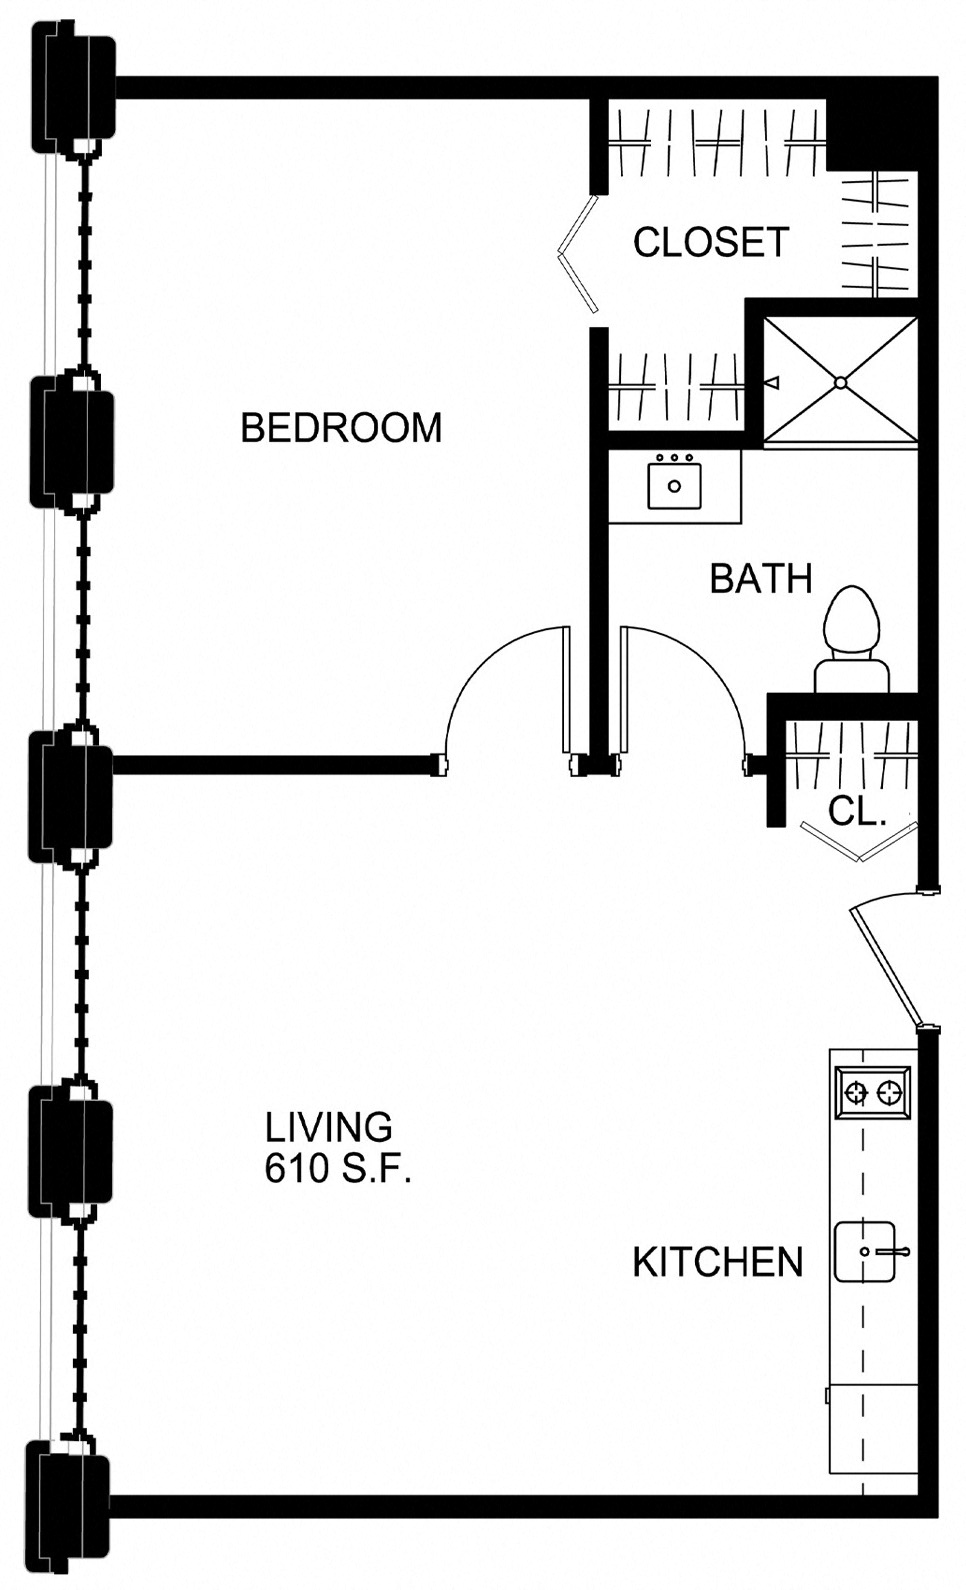 Floorplan for Apartment #S2424, 1 bedroom unit at Halstead Providence